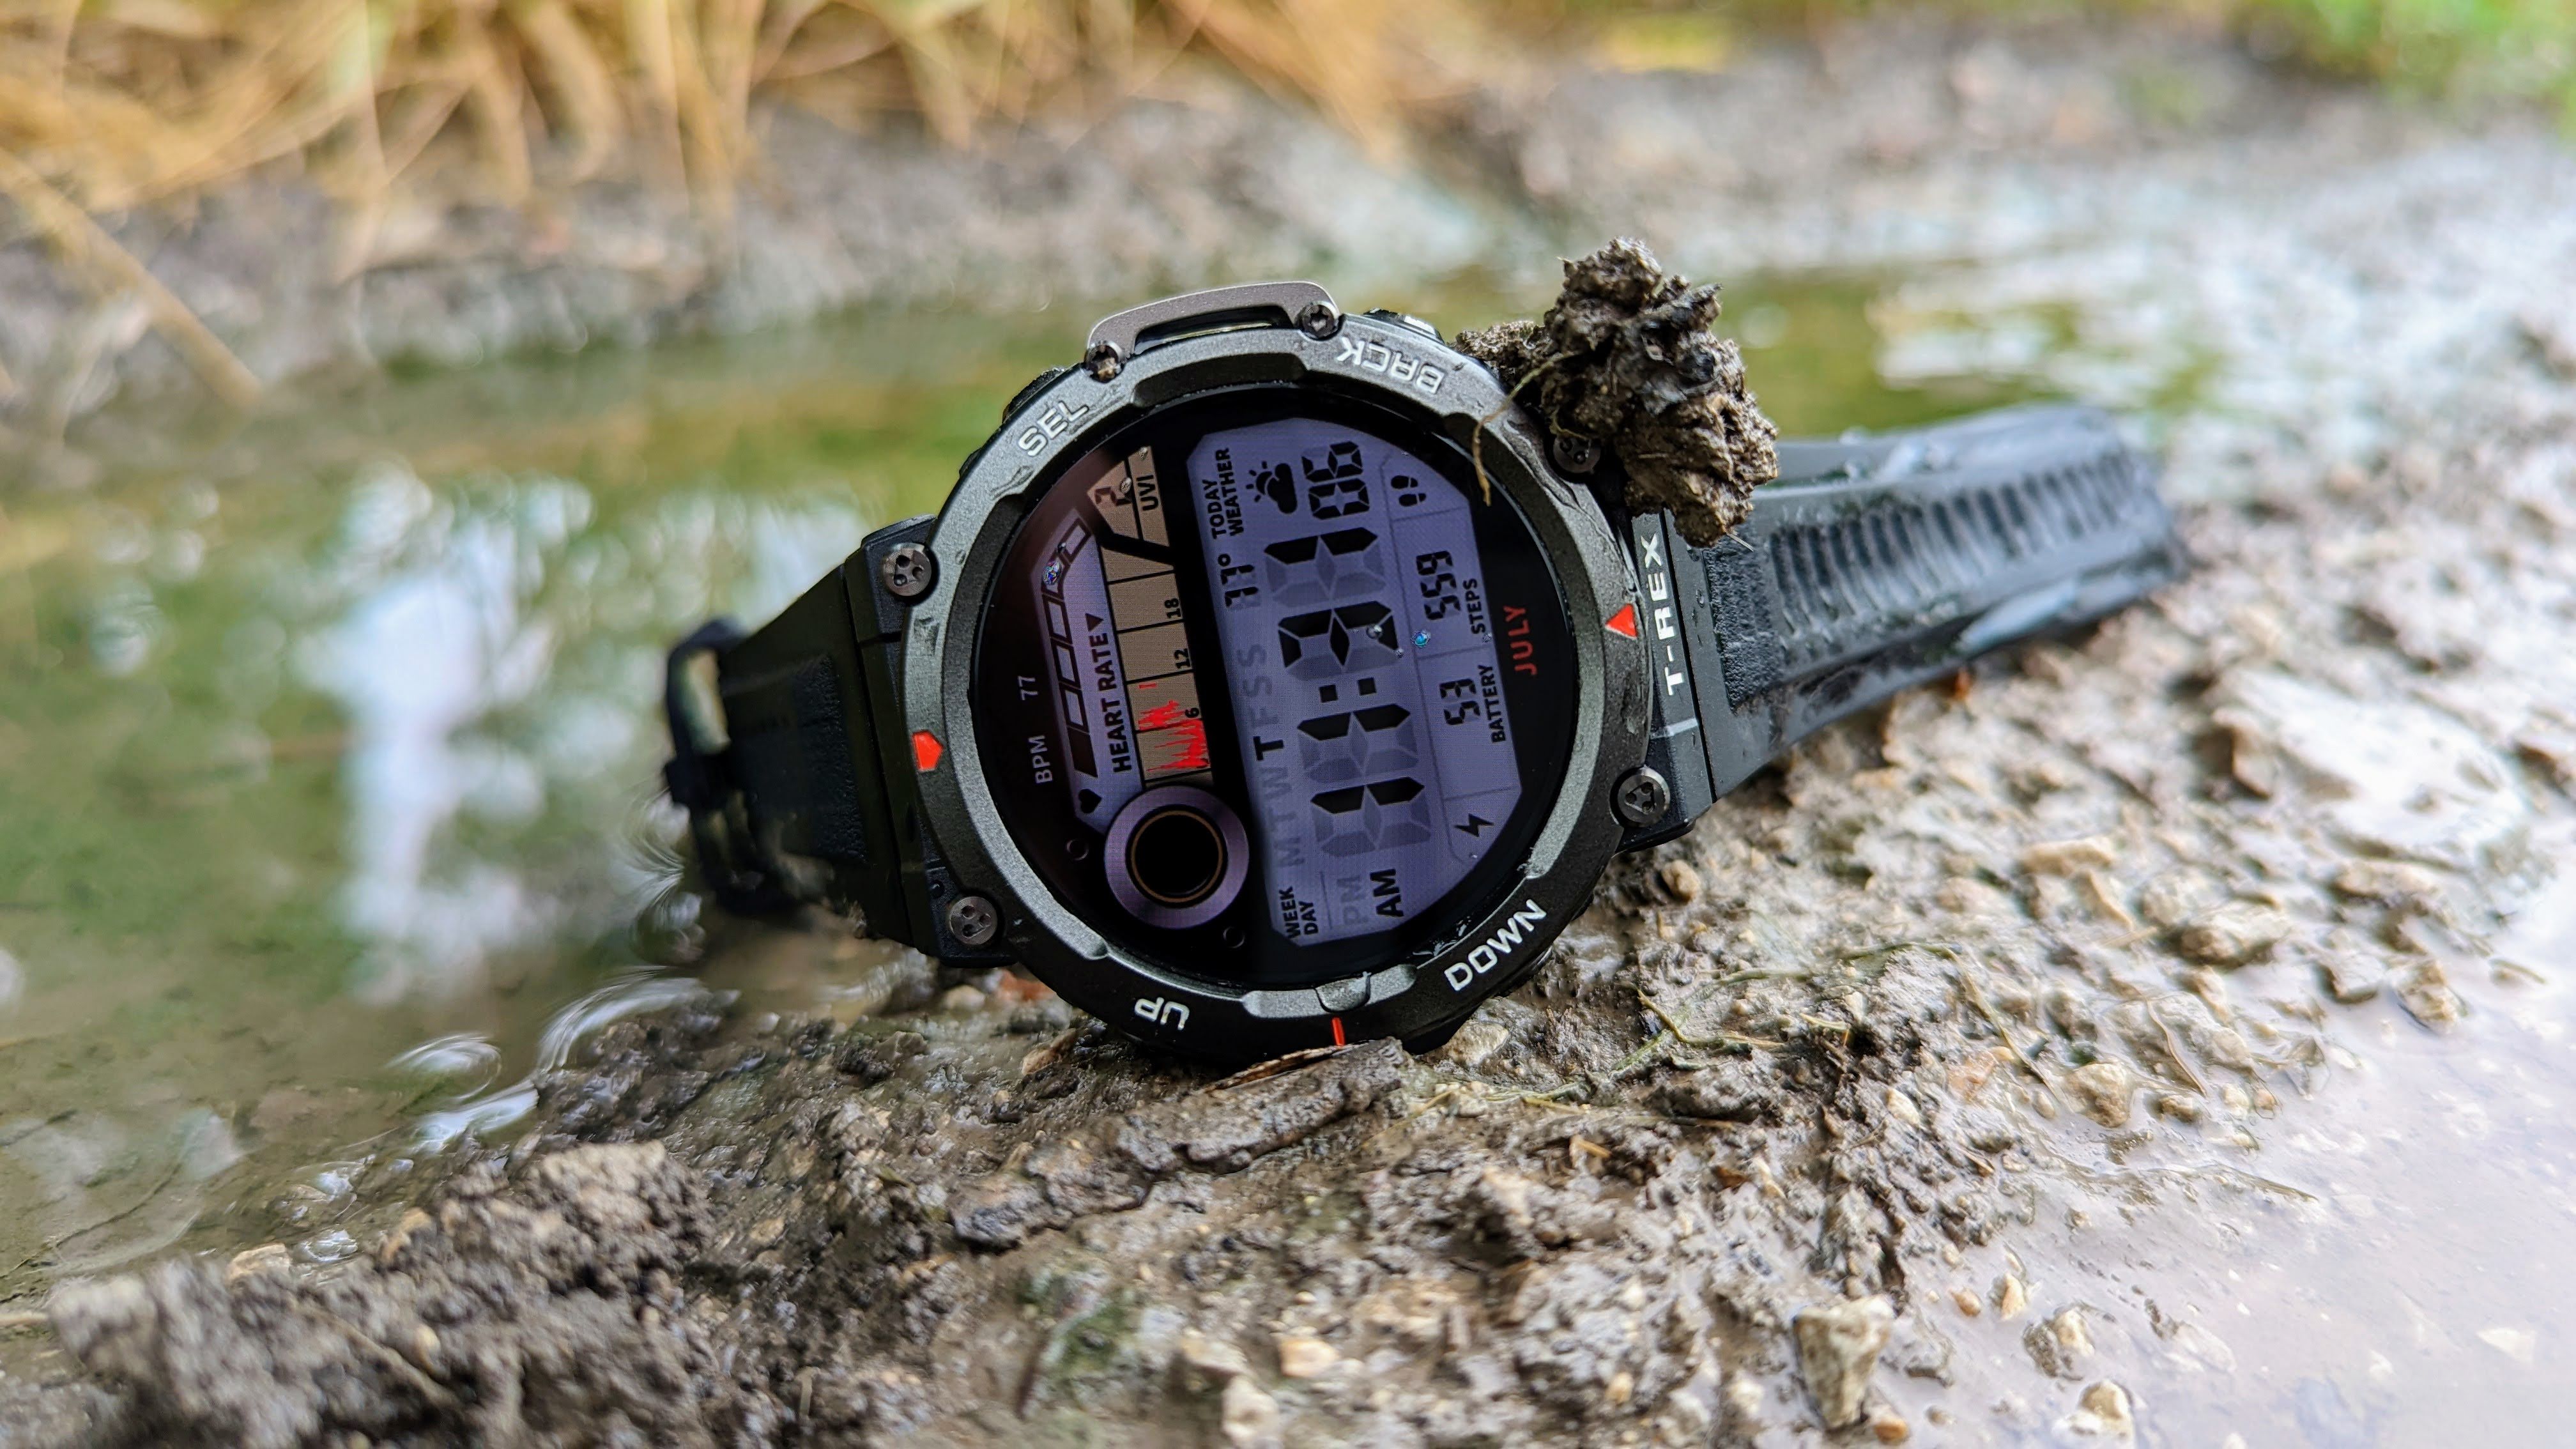 Amazfit T-Rex Ultra: What Goes into an Ultra?